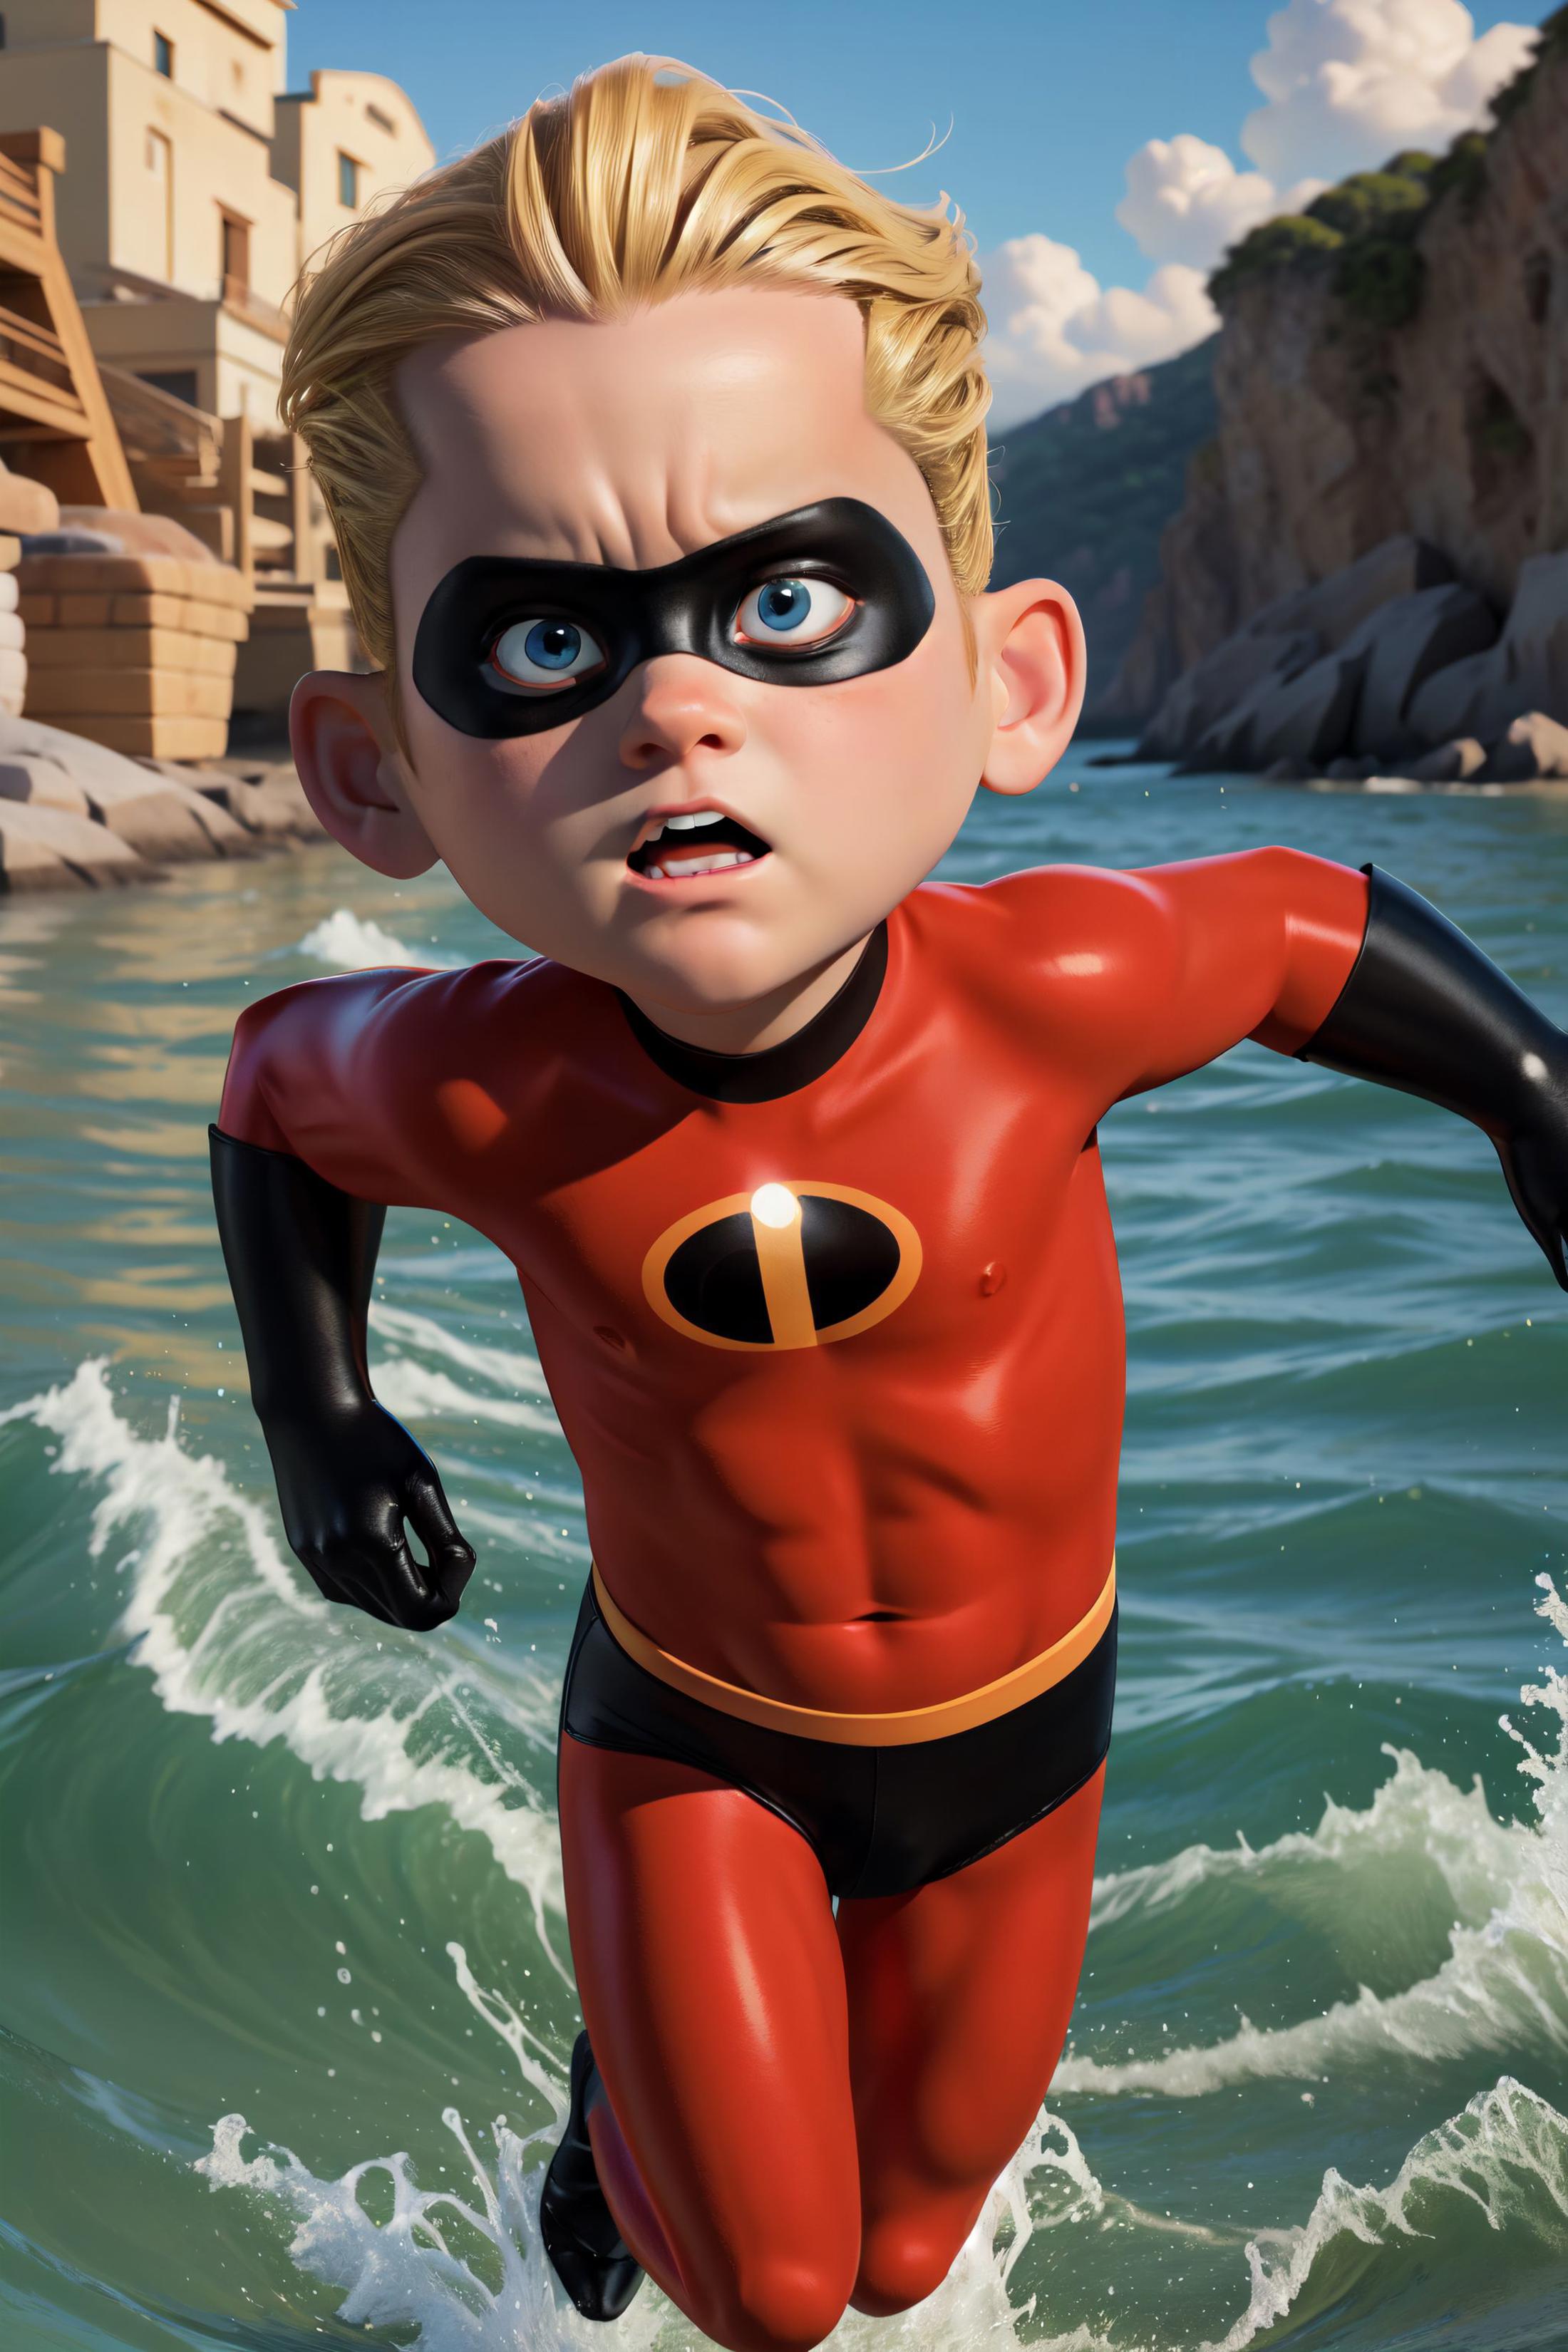 Dash Parr [ The Incredibles ] image by Tigra